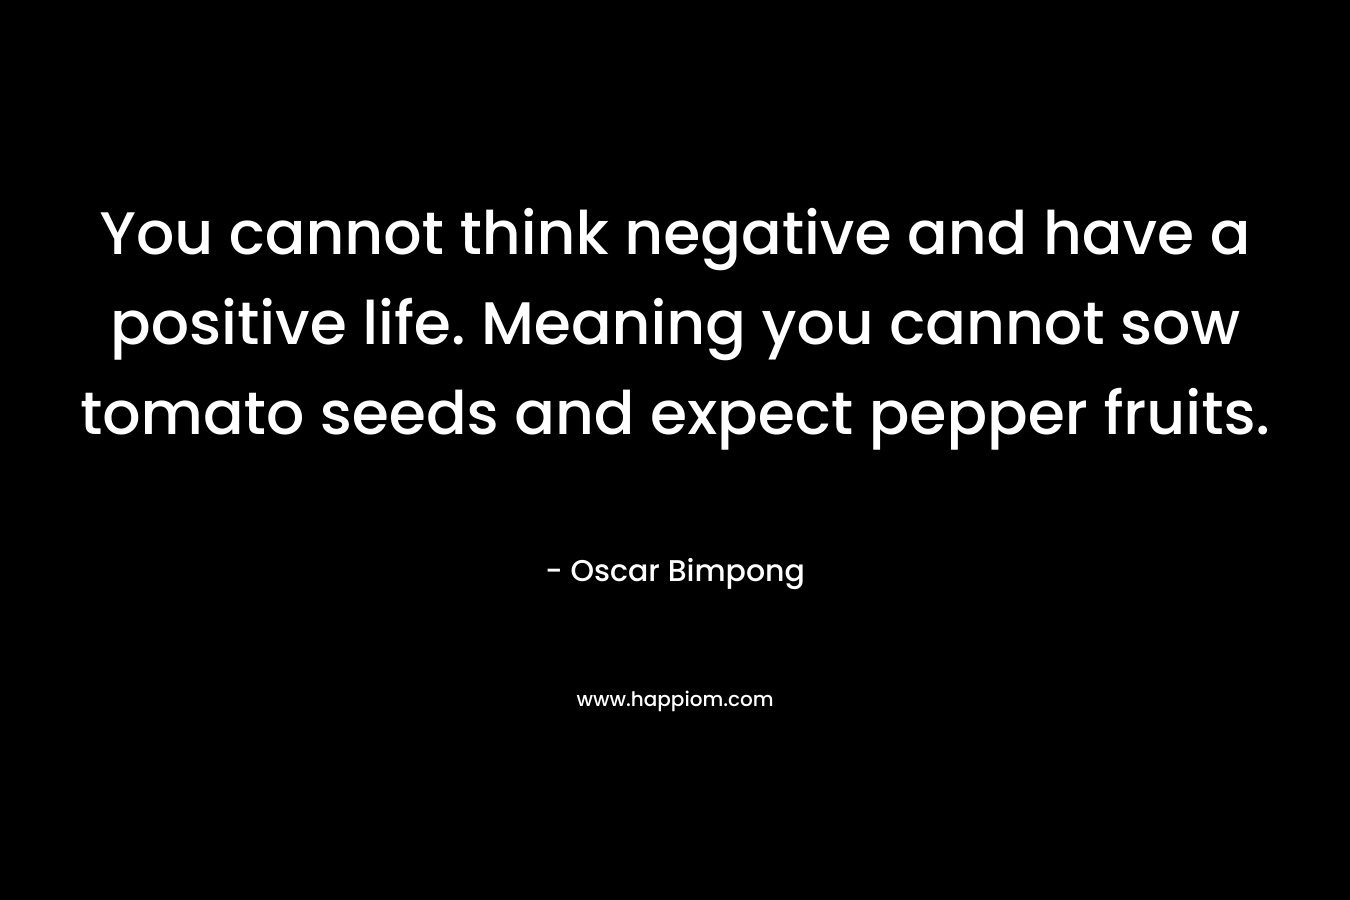 You cannot think negative and have a positive life. Meaning you cannot sow tomato seeds and expect pepper fruits. – Oscar Bimpong